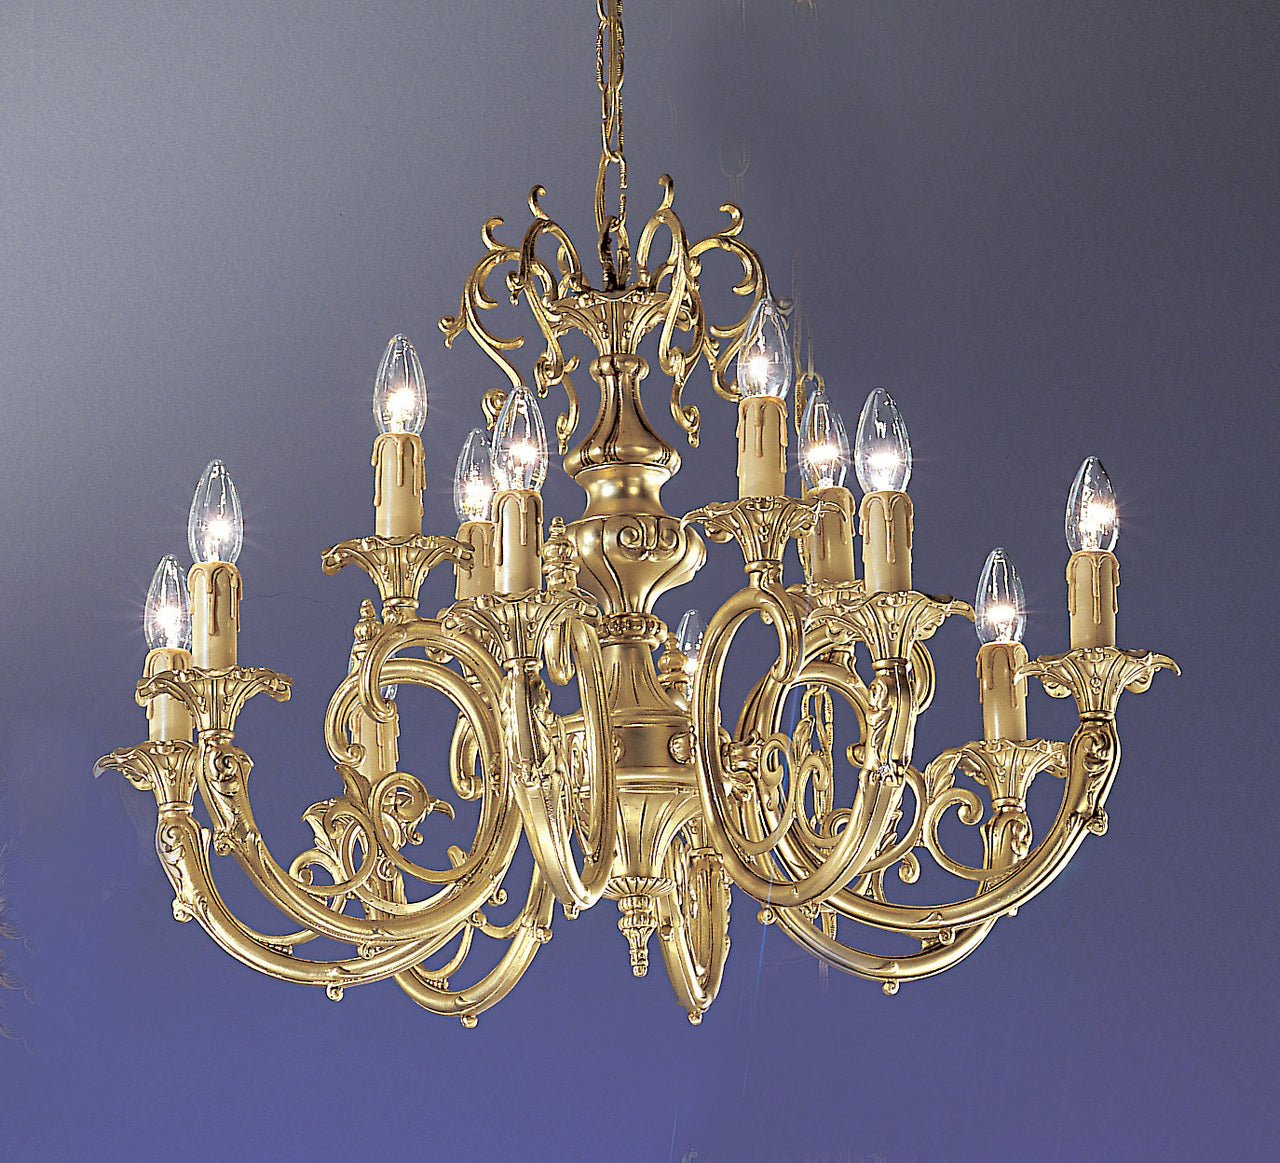 Classic Lighting 5712 SBB SC Princeton Crystal/Cast Brass Chandelier in Satin Bronze/Brown Patina (Imported from Spain)